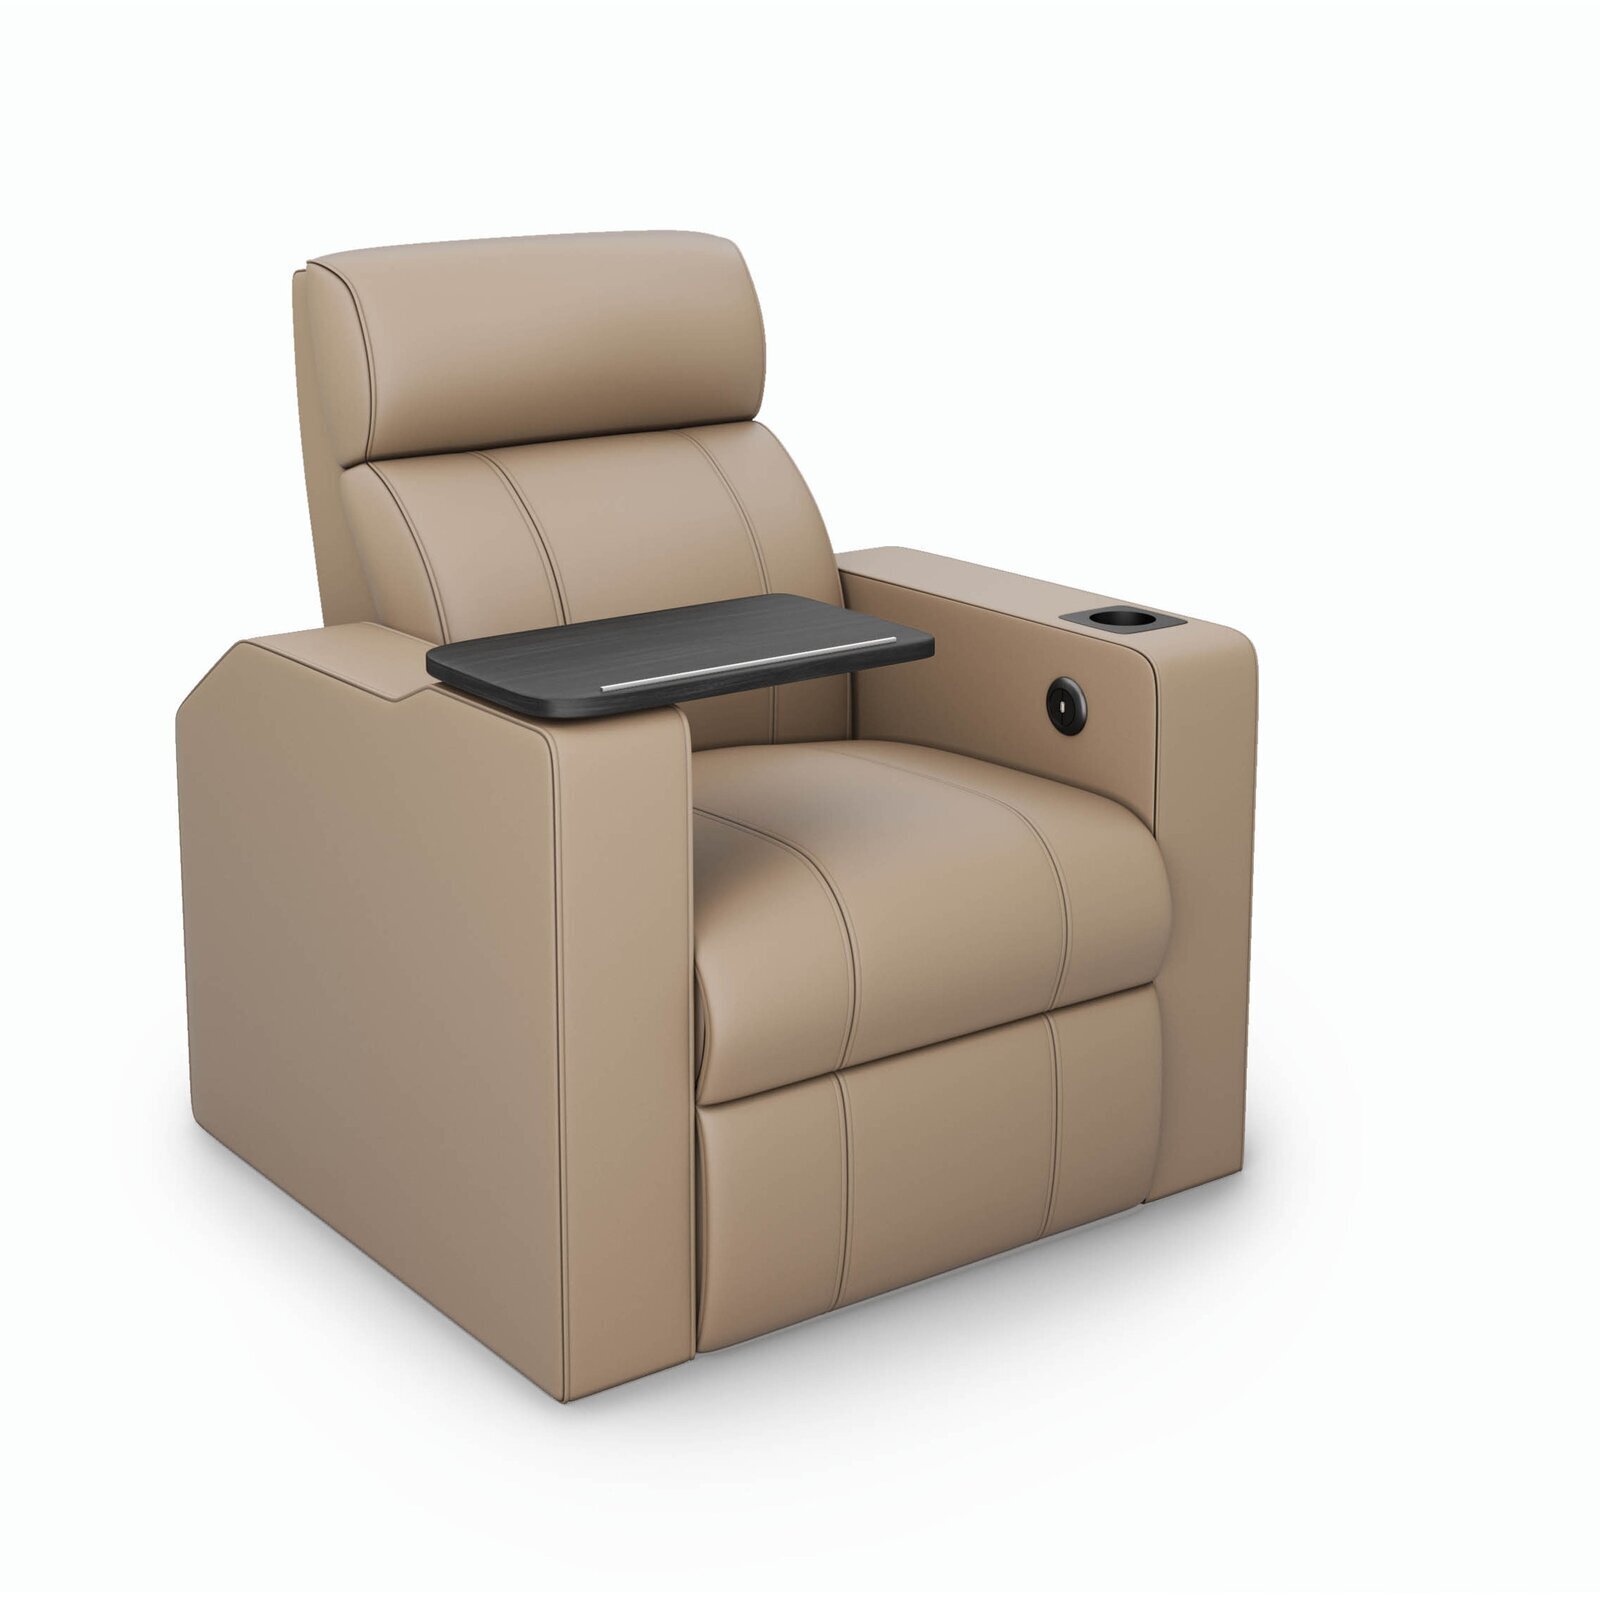 Individual Comfortable Home Theater Seating